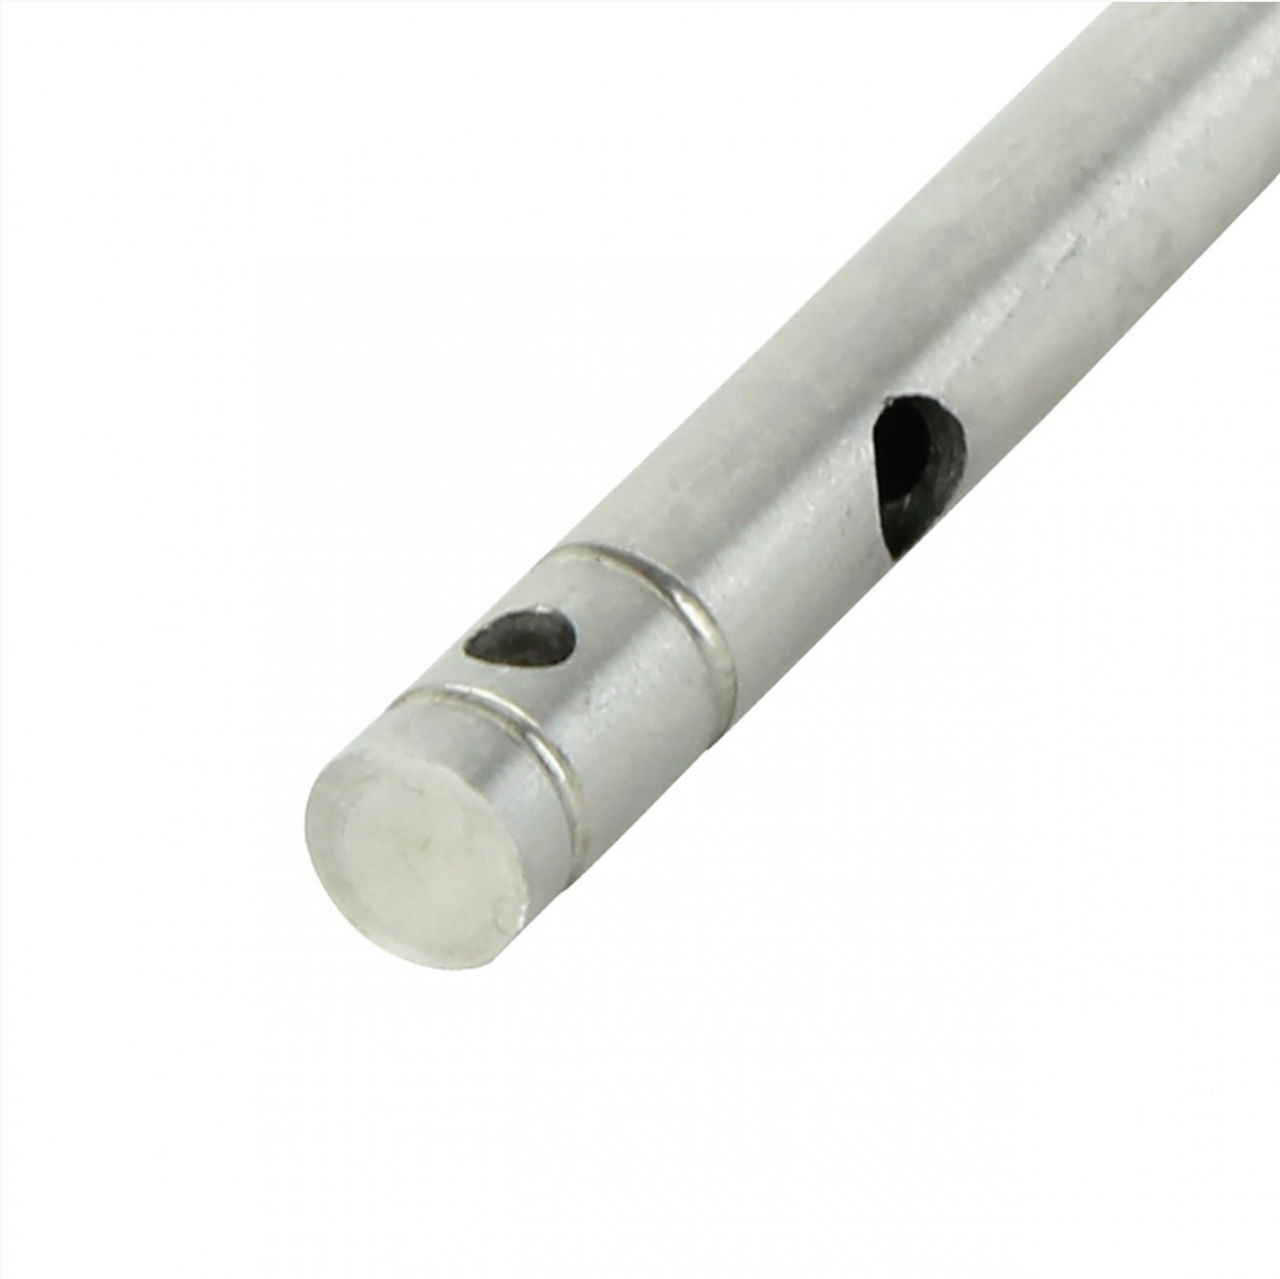 TacFire AR15/M16 Hardened Stainless Steel Gas Tubes with Roll Pin